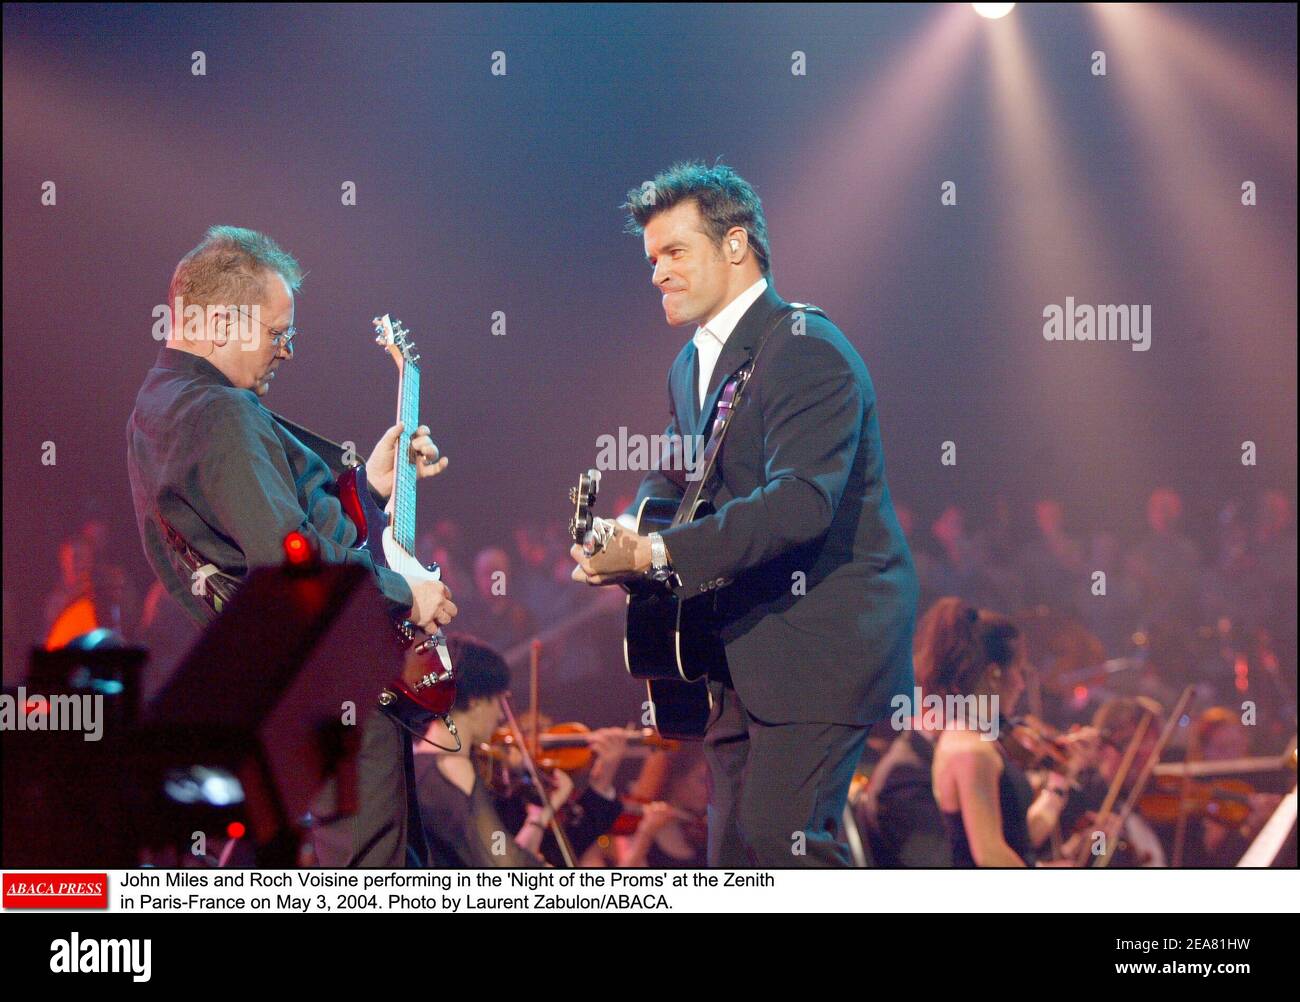 John Miles and Roch Voisine performing in the 'Night of the Proms' at the Zenith in Paris-France on May 3, 2004. Photo by Laurent Zabulon/ABACA. Stock Photo